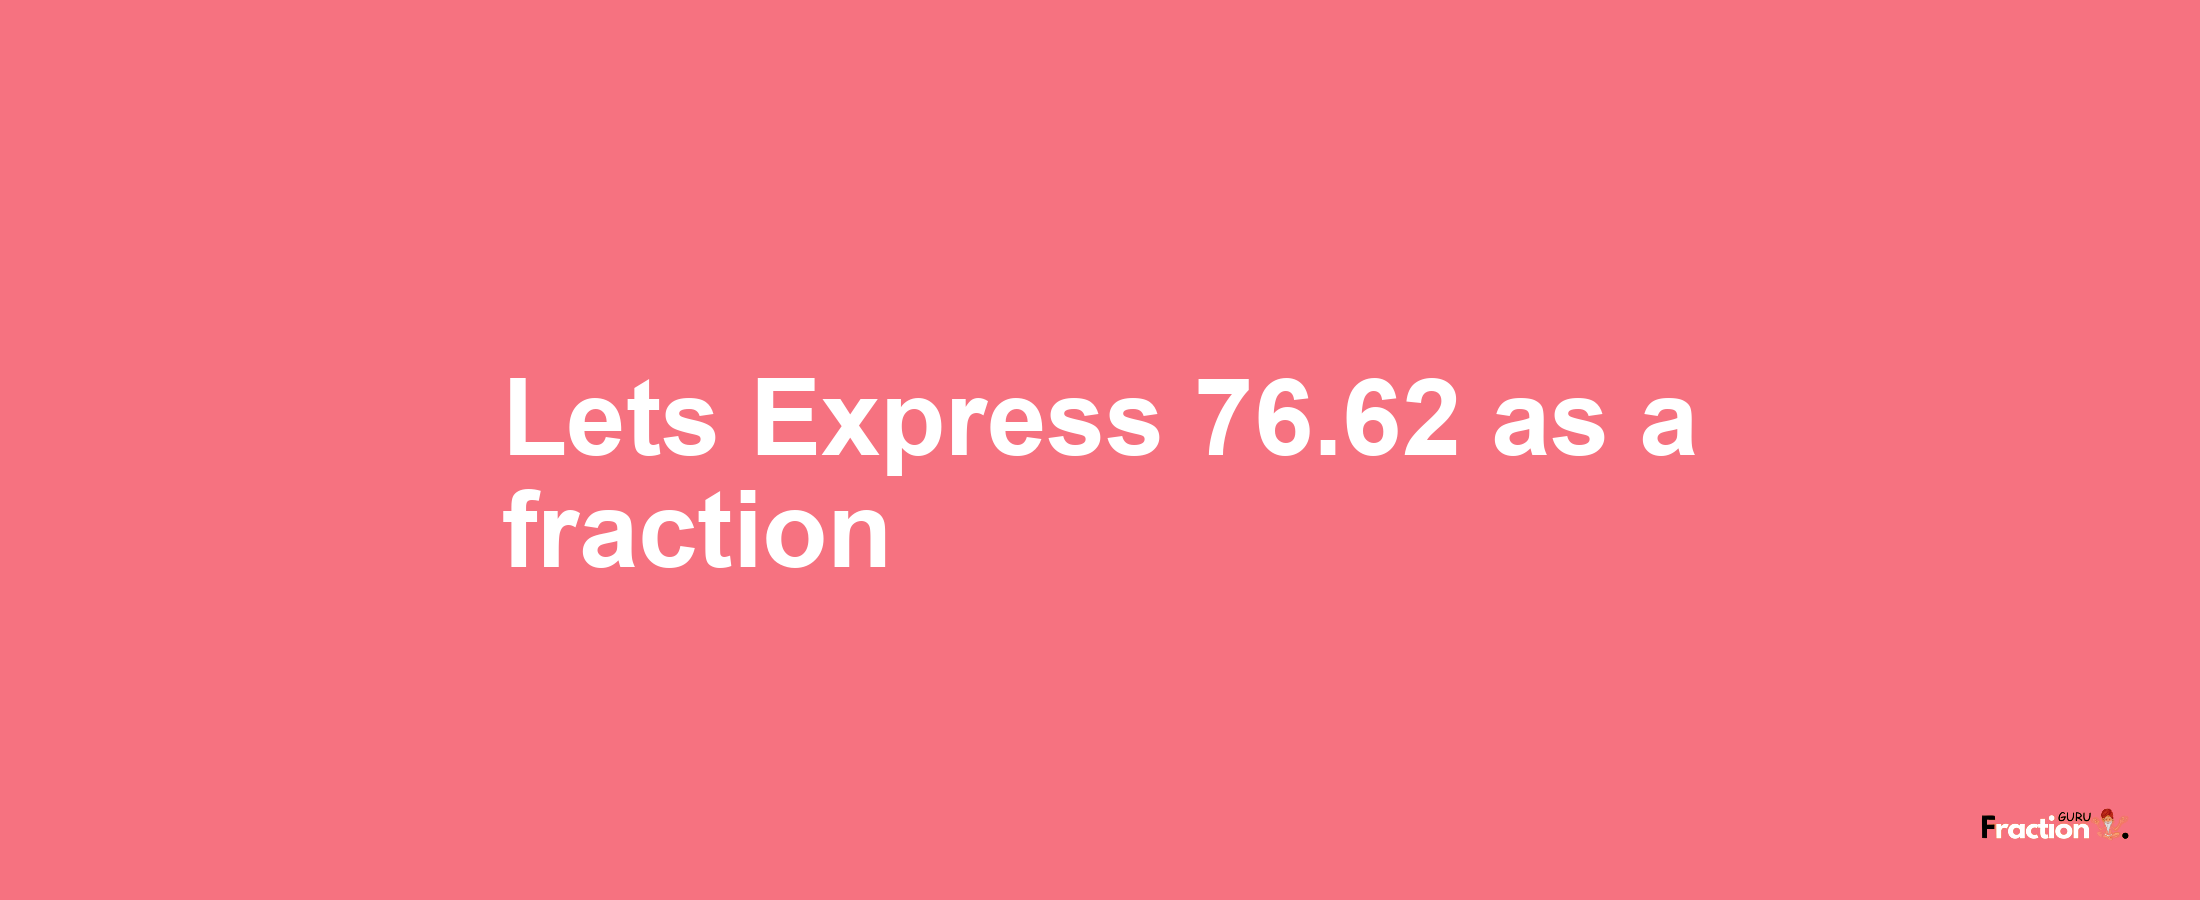 Lets Express 76.62 as afraction